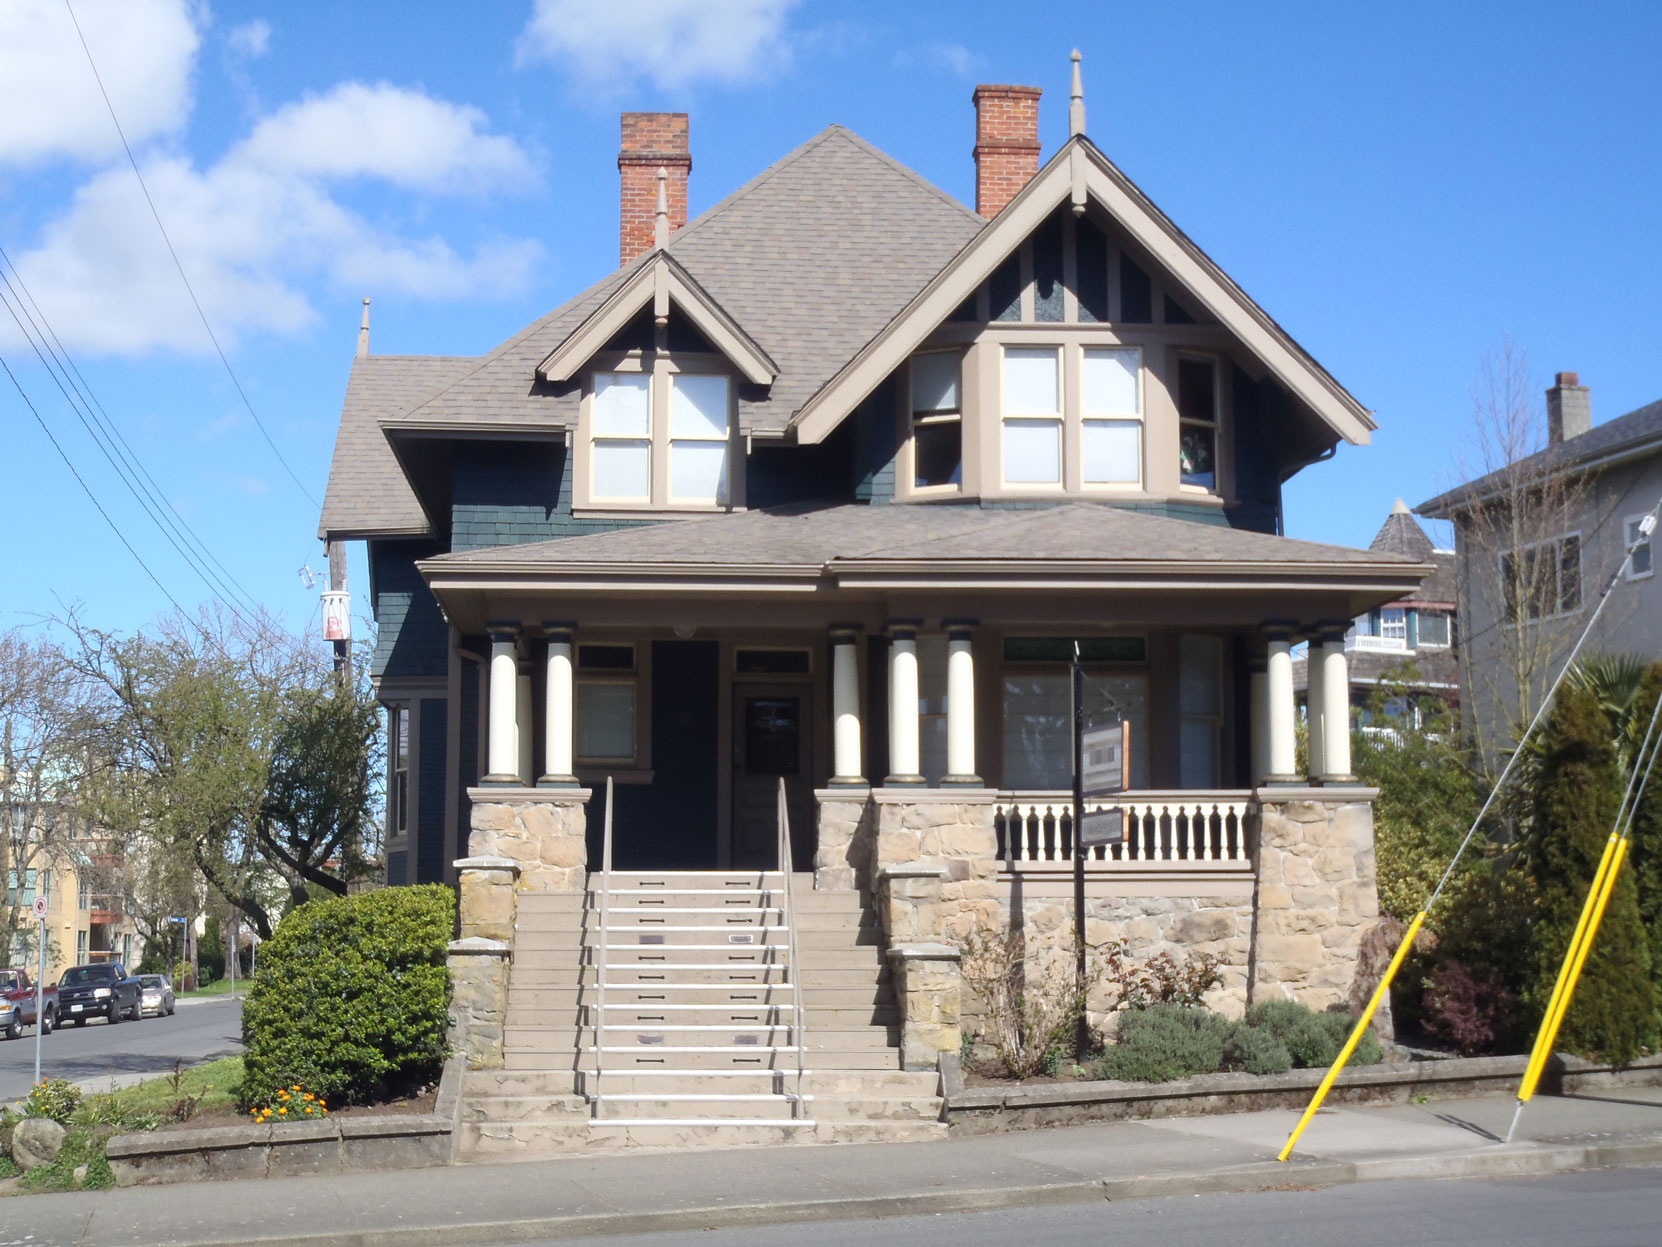 1202 Fort Street, built in 1906 by architects Thomas Hooper and C. Elwood Watkins, is listed on the Victoria Heritage Register (photo: Victoria Online Sightseeing Tours)